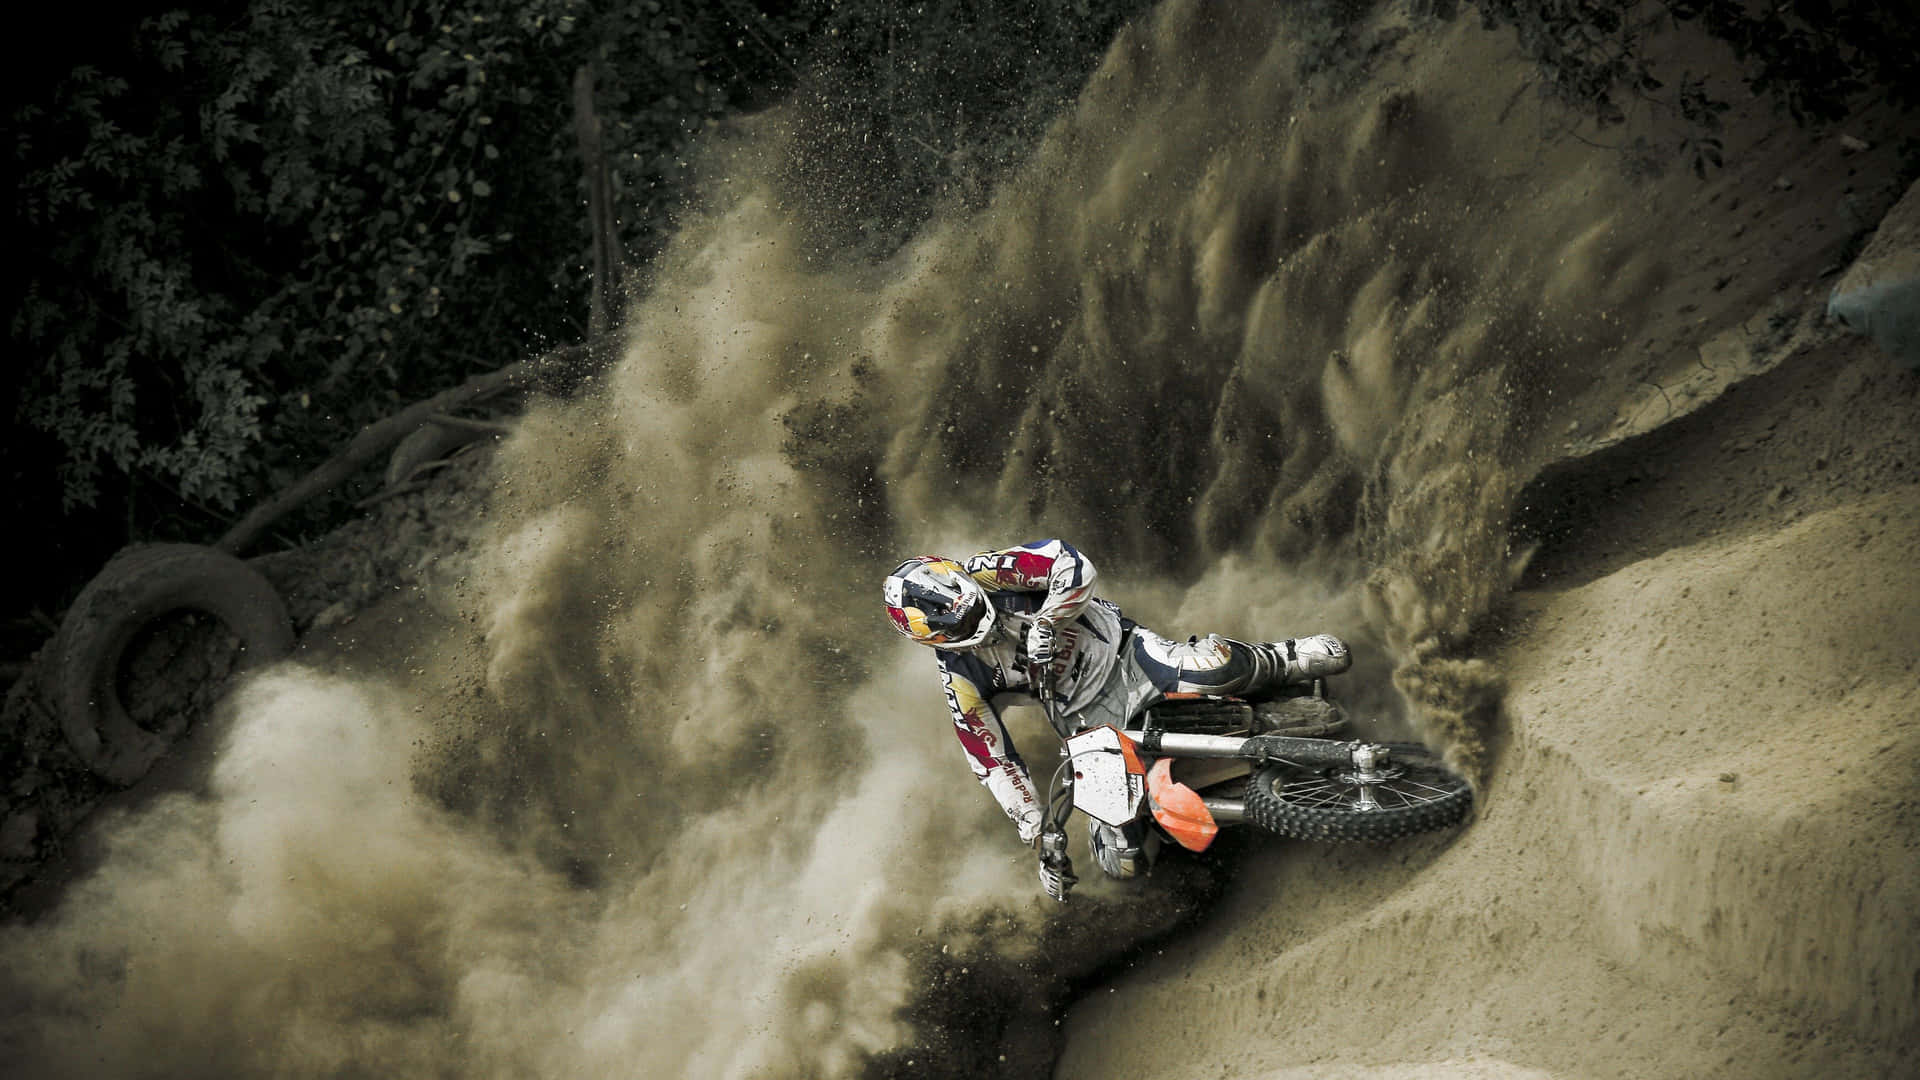 Action-packed dirt bike riding on a motocross track